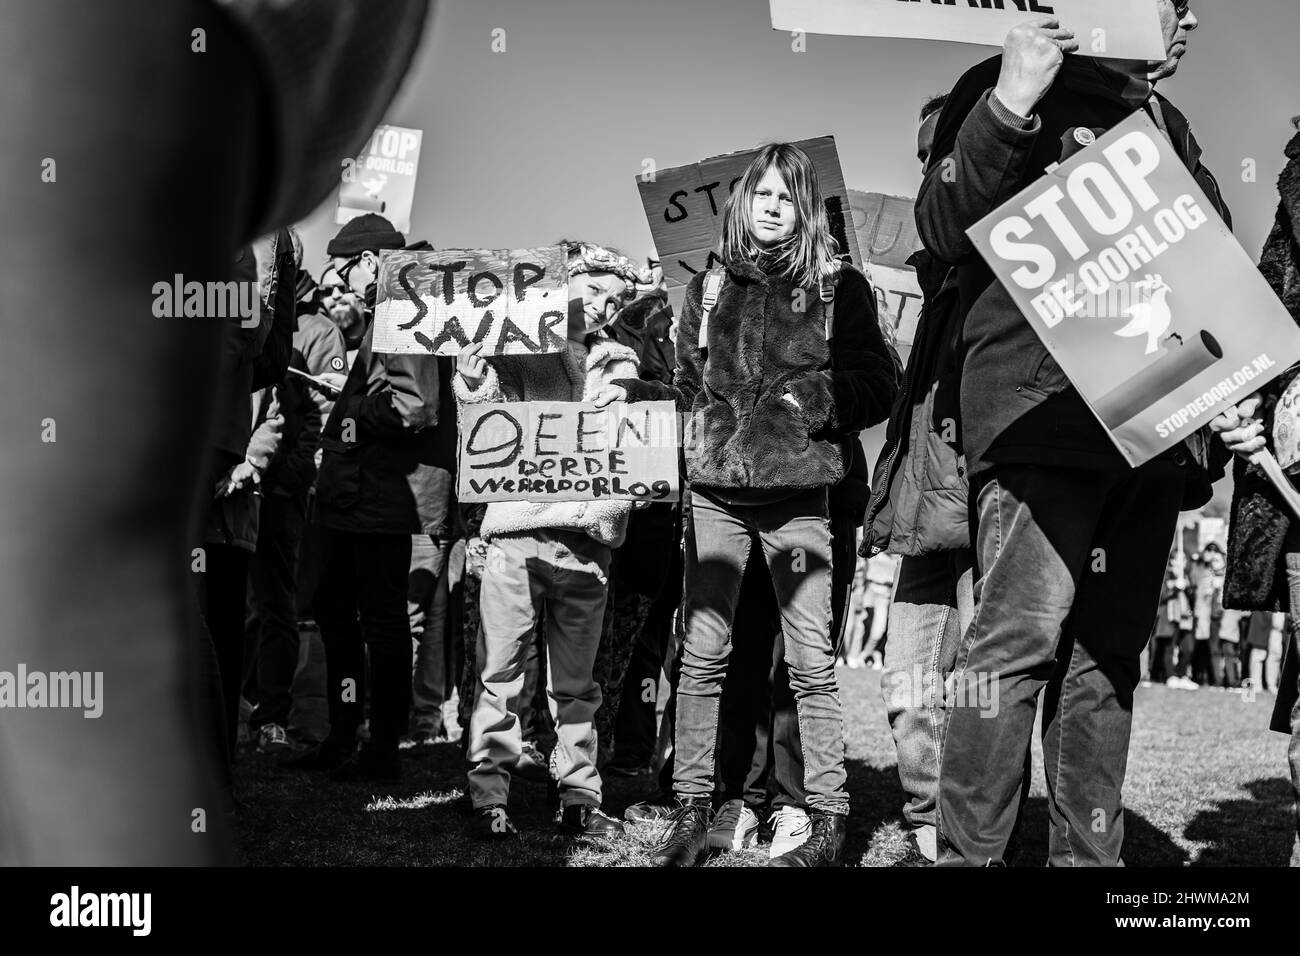 The Hague in The Netherlands - March 5, 2022: People demonstrating against war in Ukraine Stock Photo